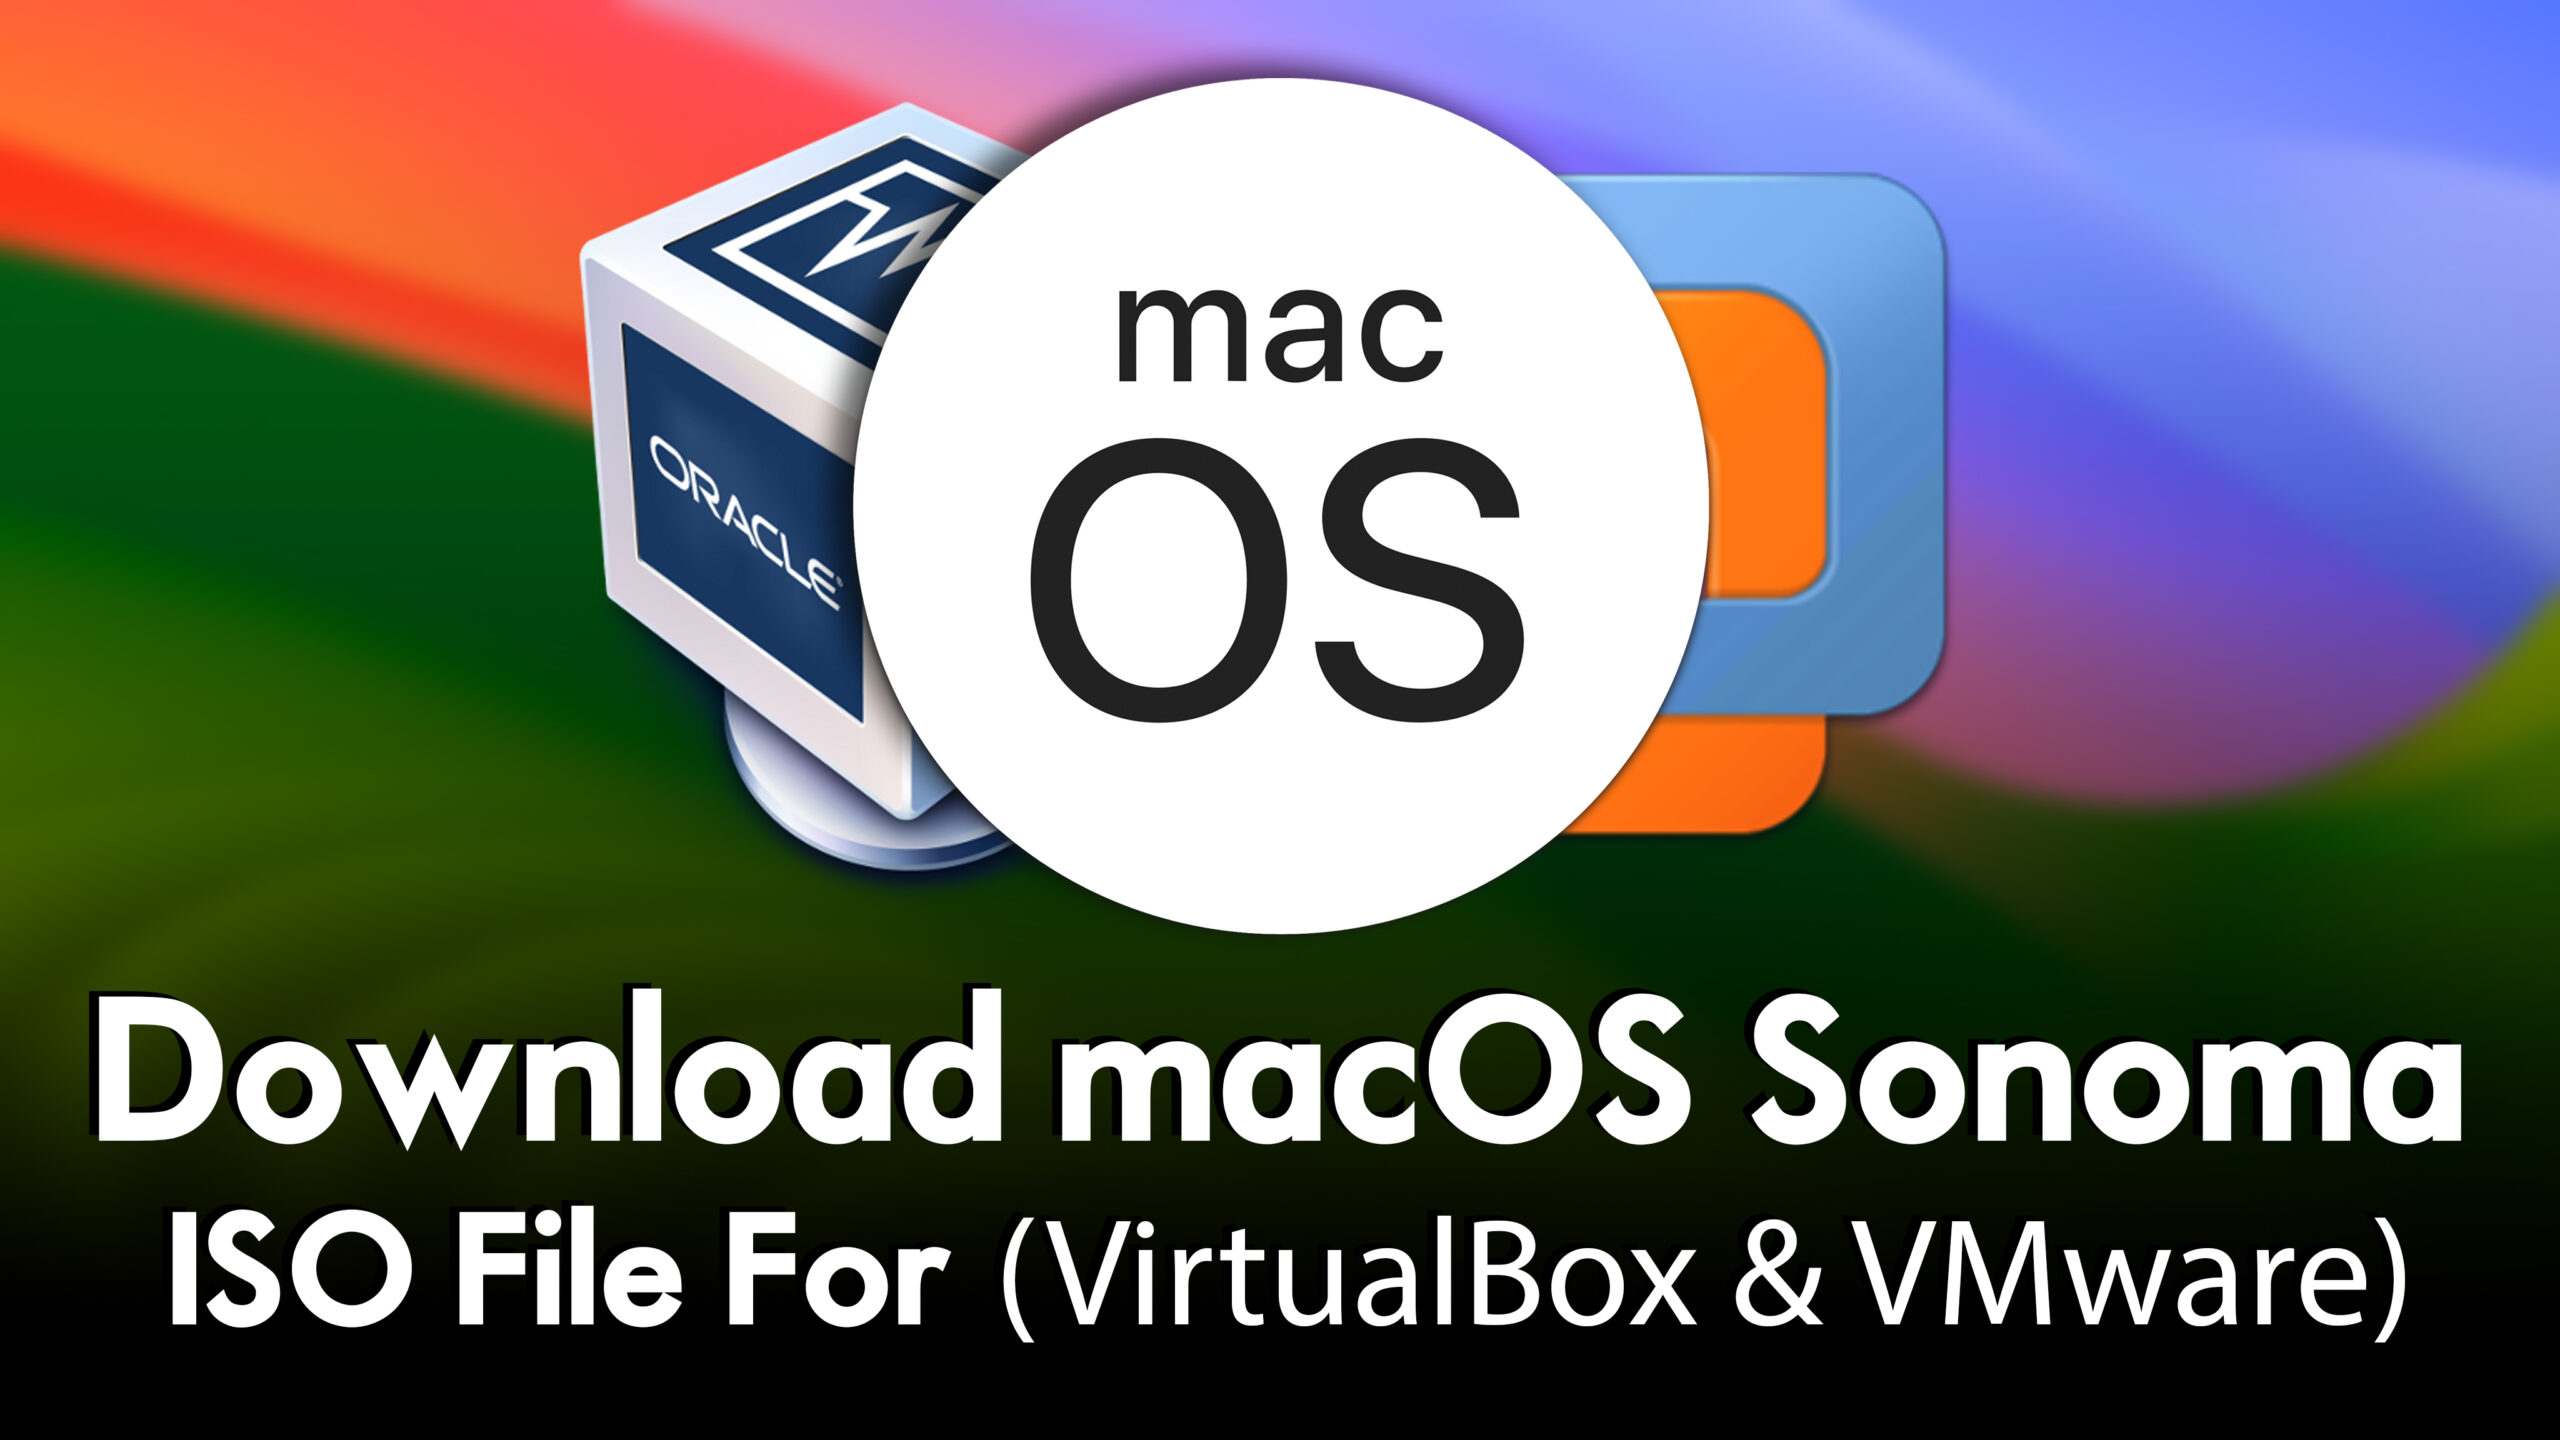 mac os sonoma download iso